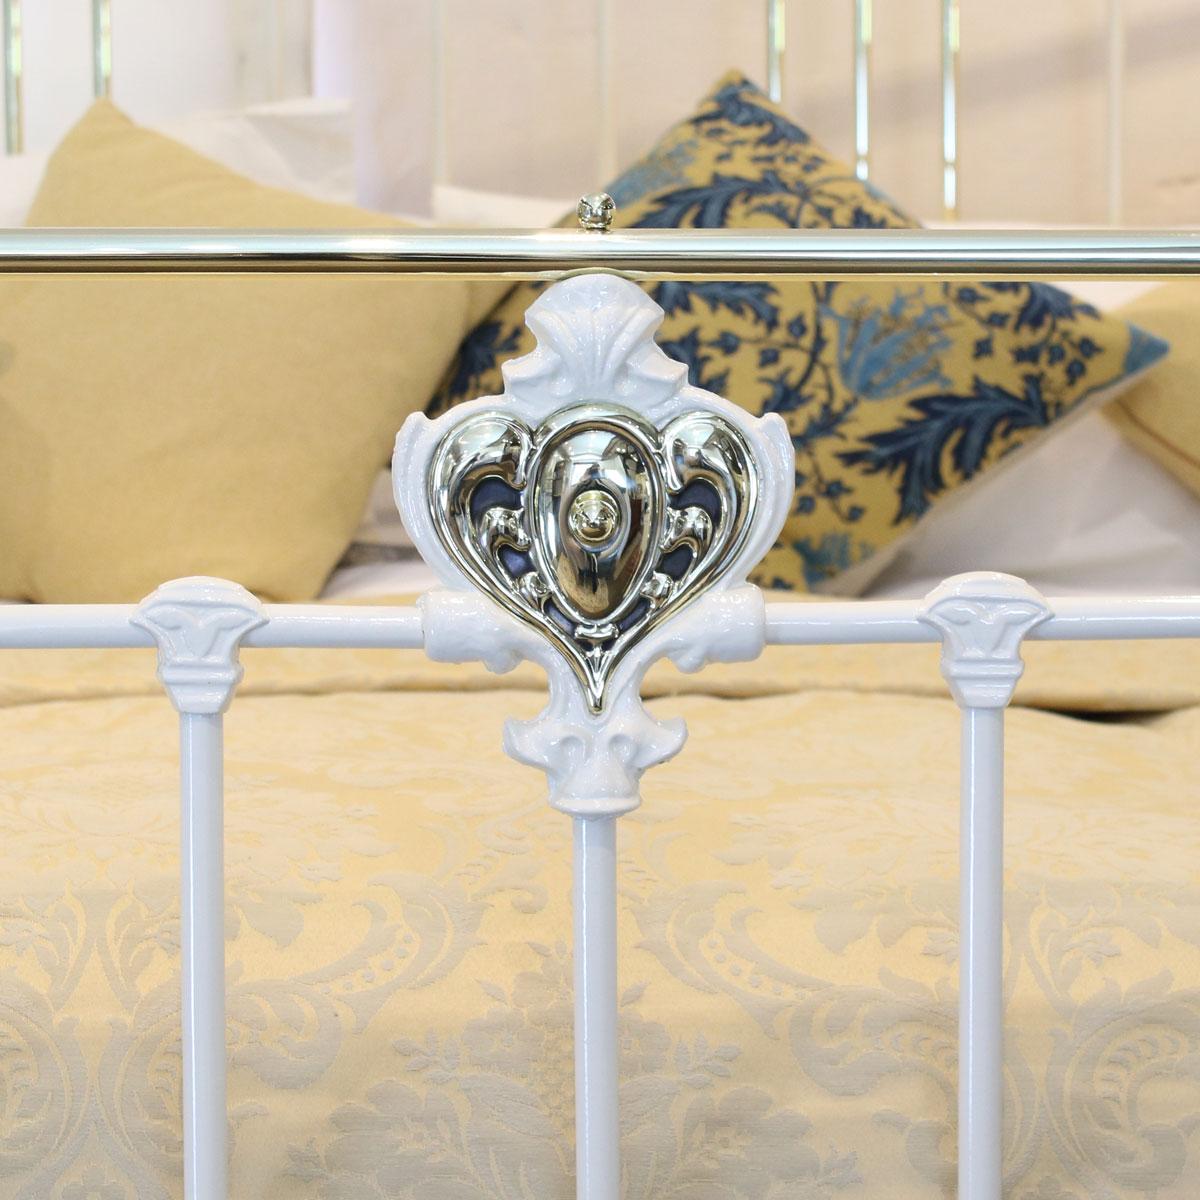 European Quality Cast Iron Bed in Cream, MSK58